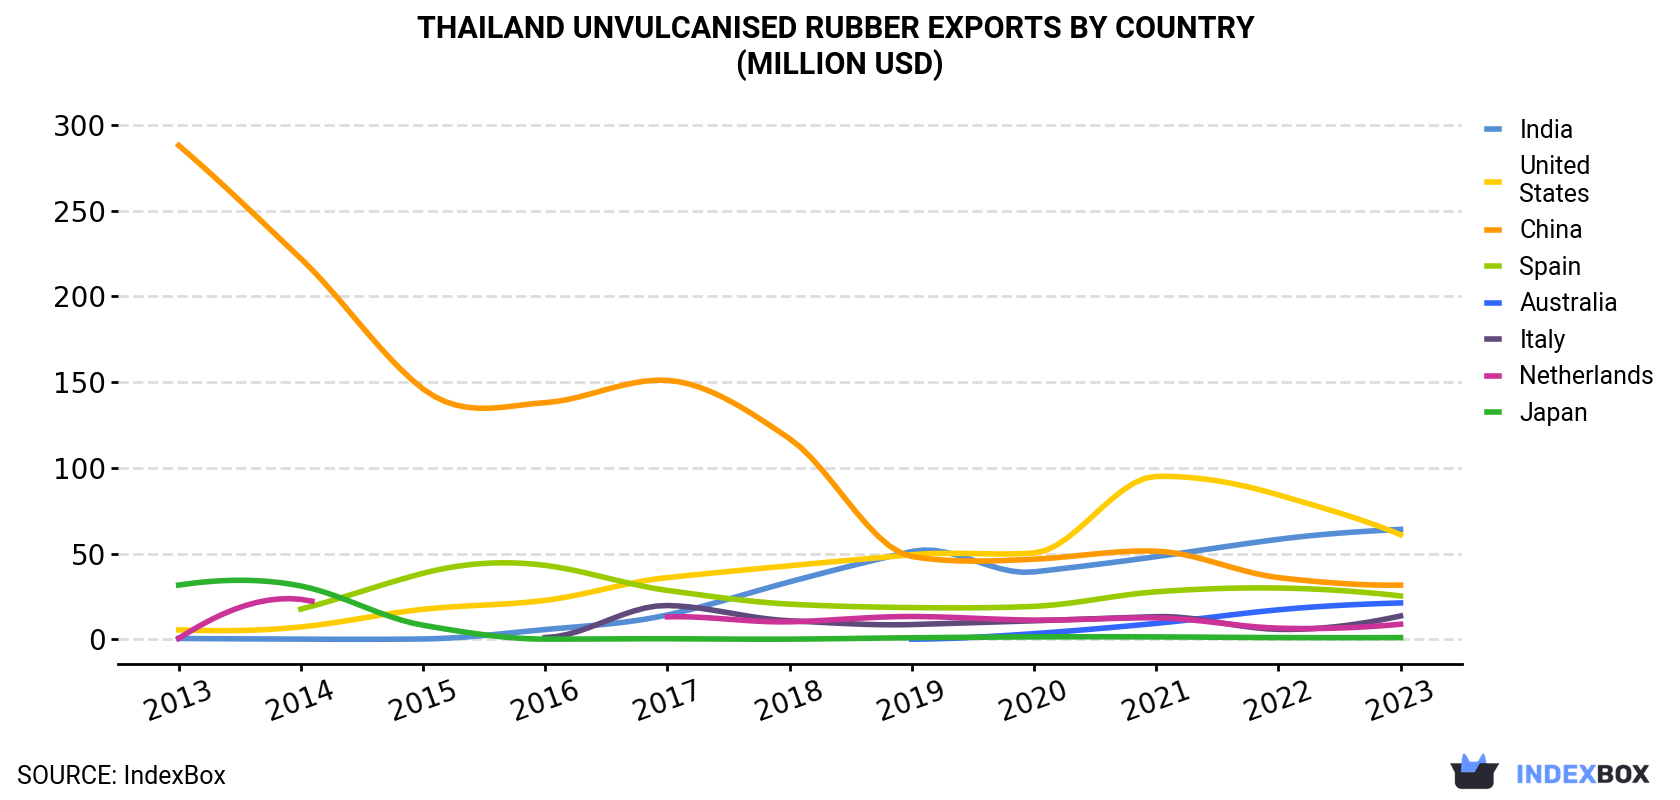 Thailand Unvulcanised Rubber Exports By Country (Million USD)